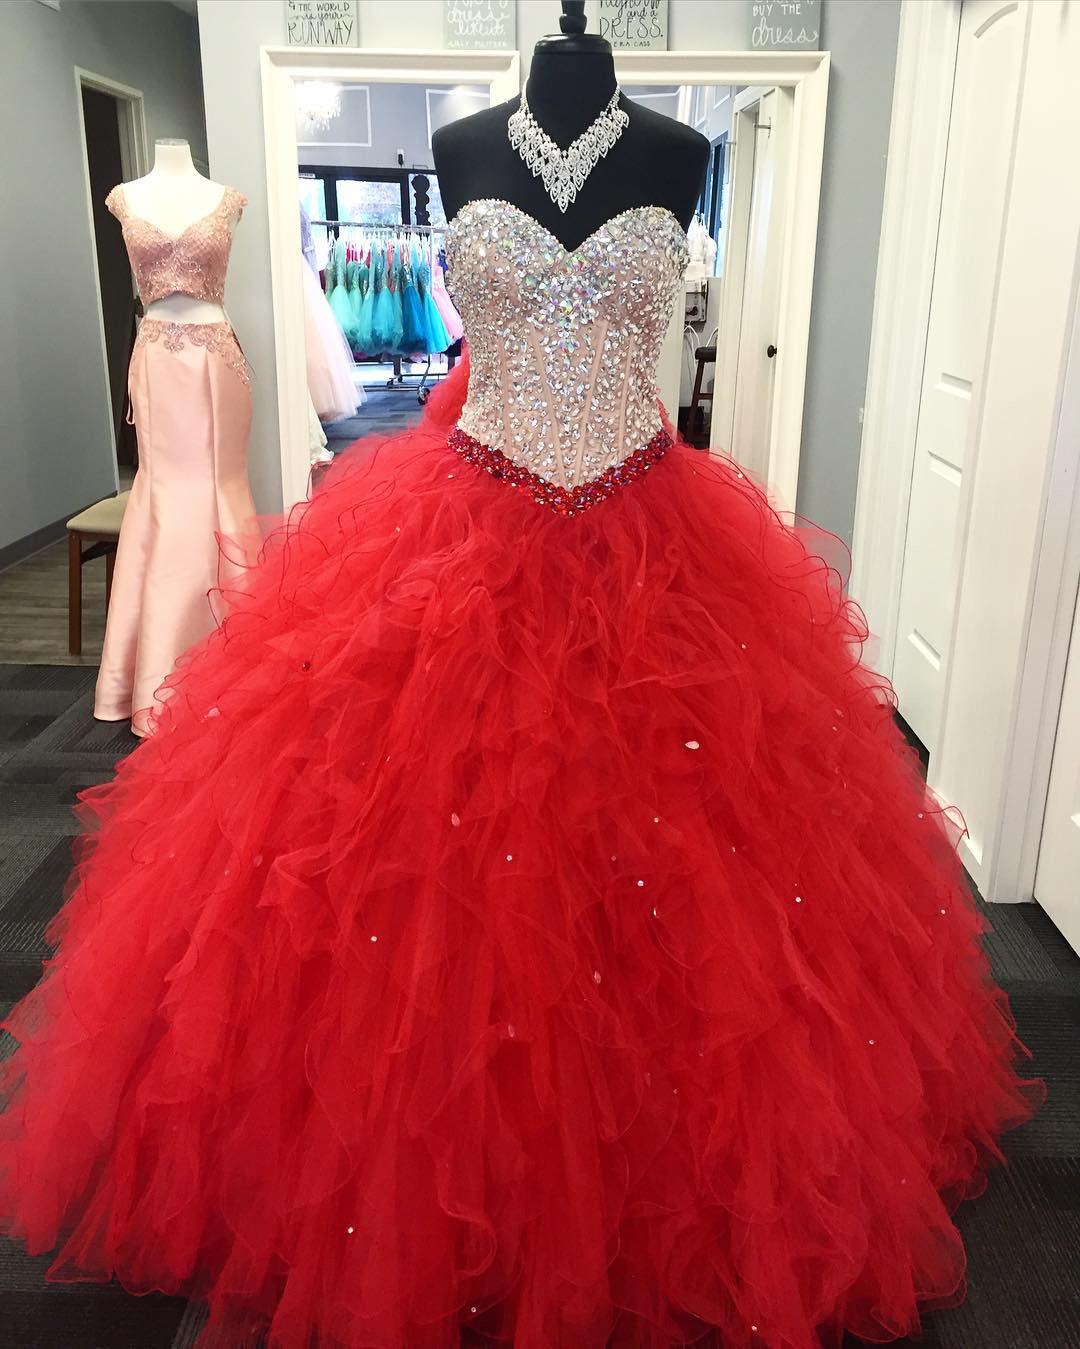 Princess Prom Ball Gown, Red Quinceanera Dresses, Sweet 16, Rhinestones Prom Dress, Sweet 18 Dresses, Sparkly Prom Dress, Tiered Prom Dress, 2020